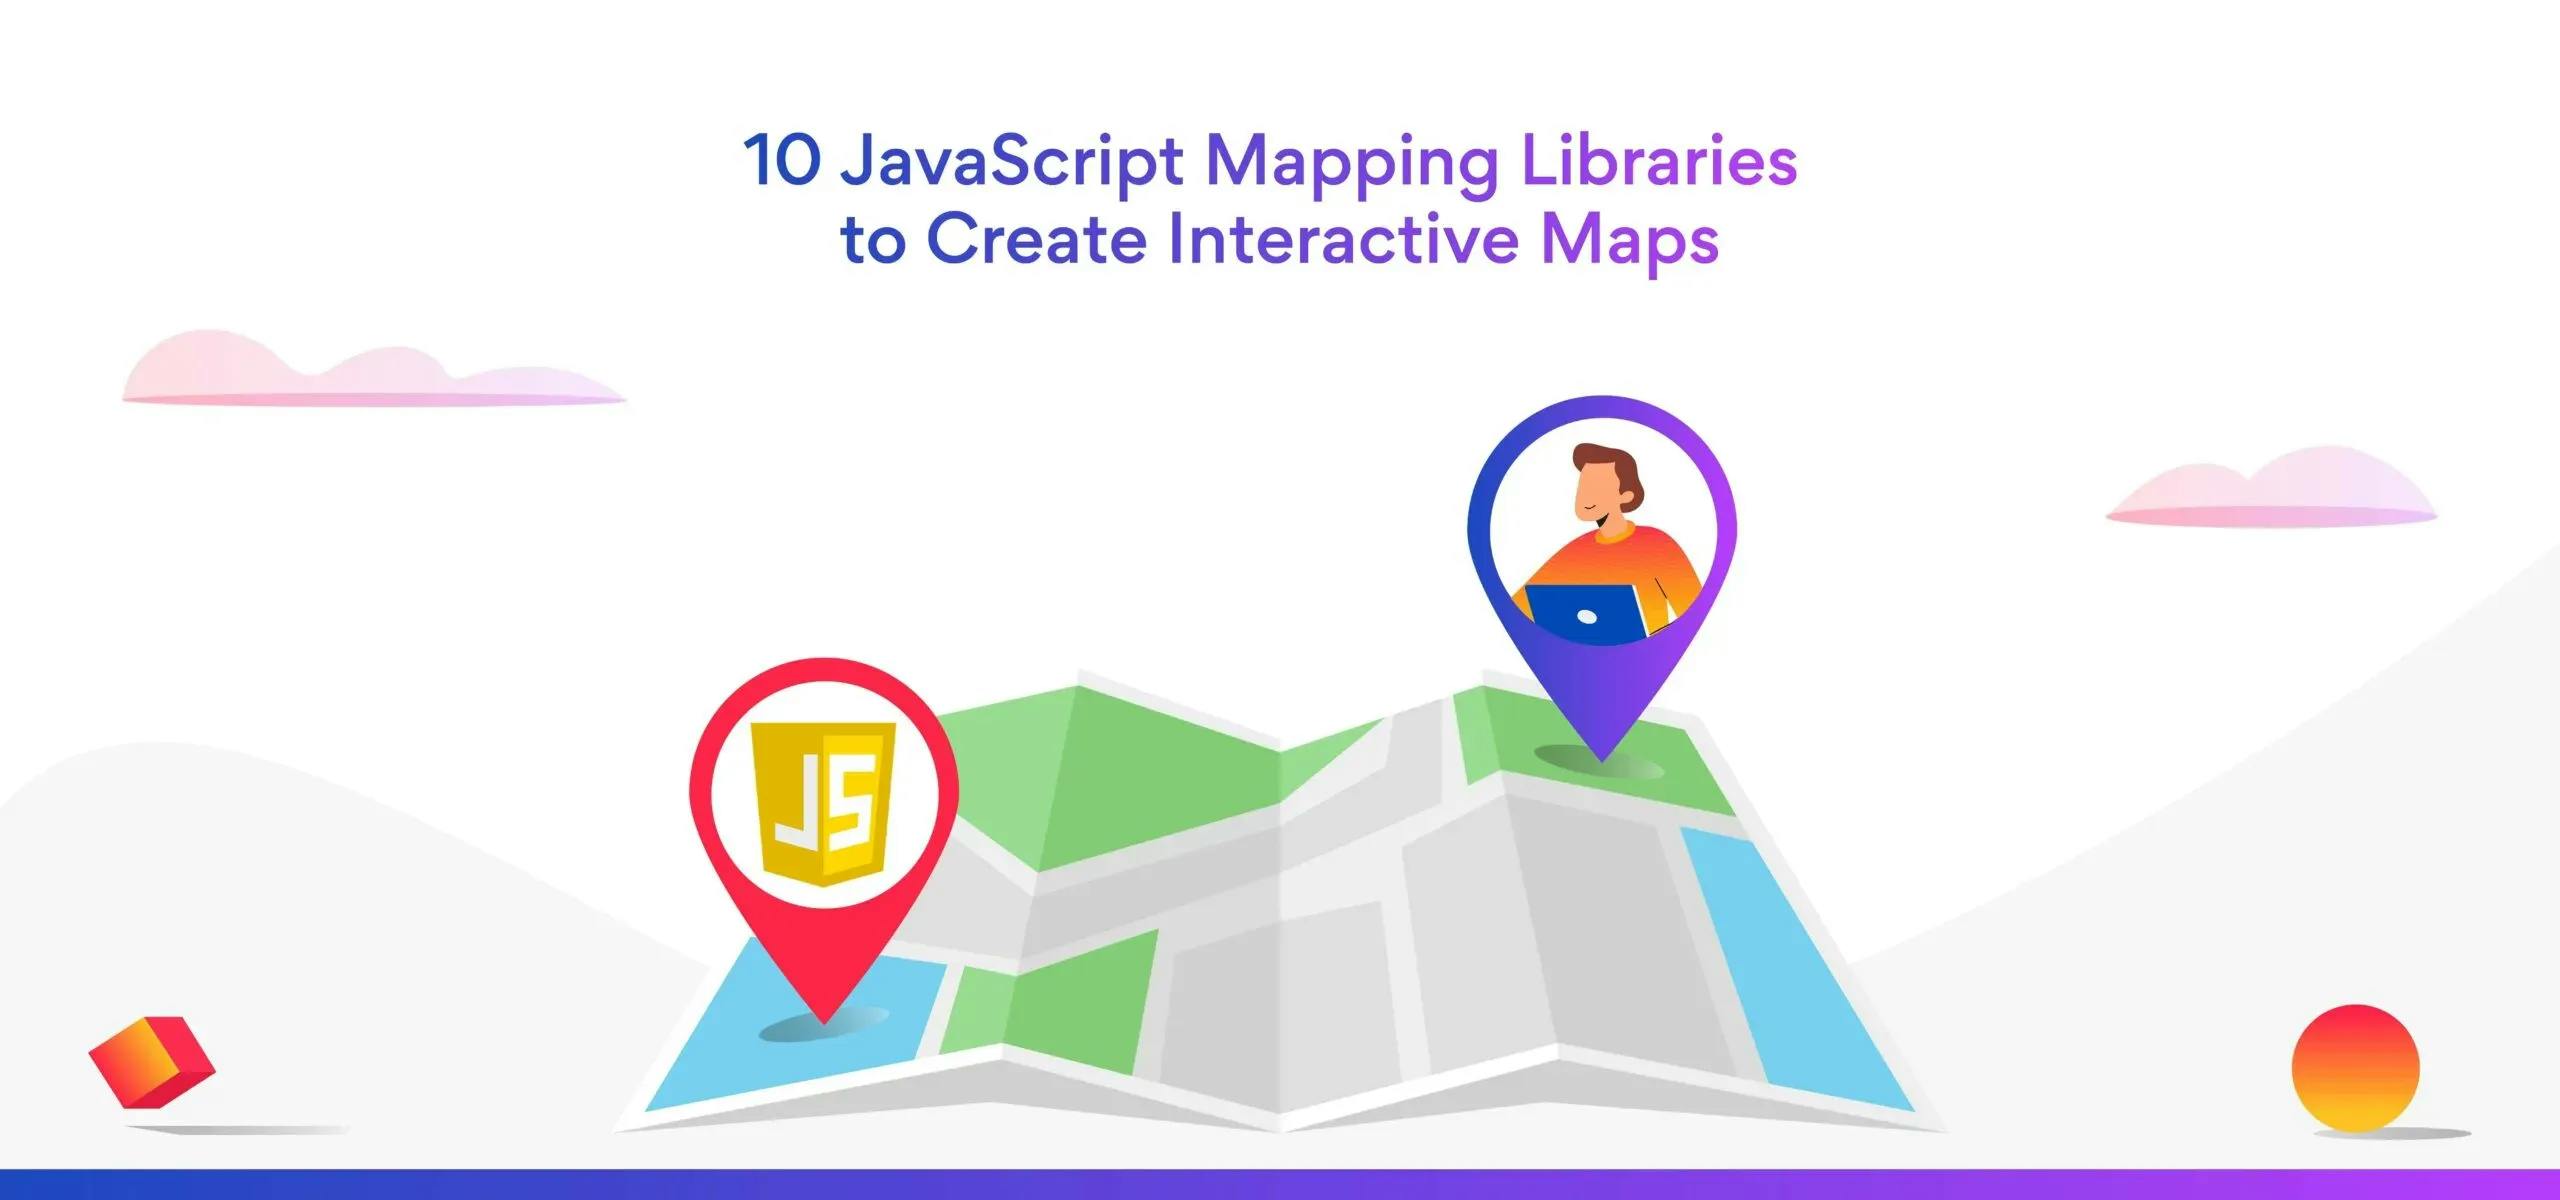 10 JavaScript Mapping Libraries to Create Interactive Maps